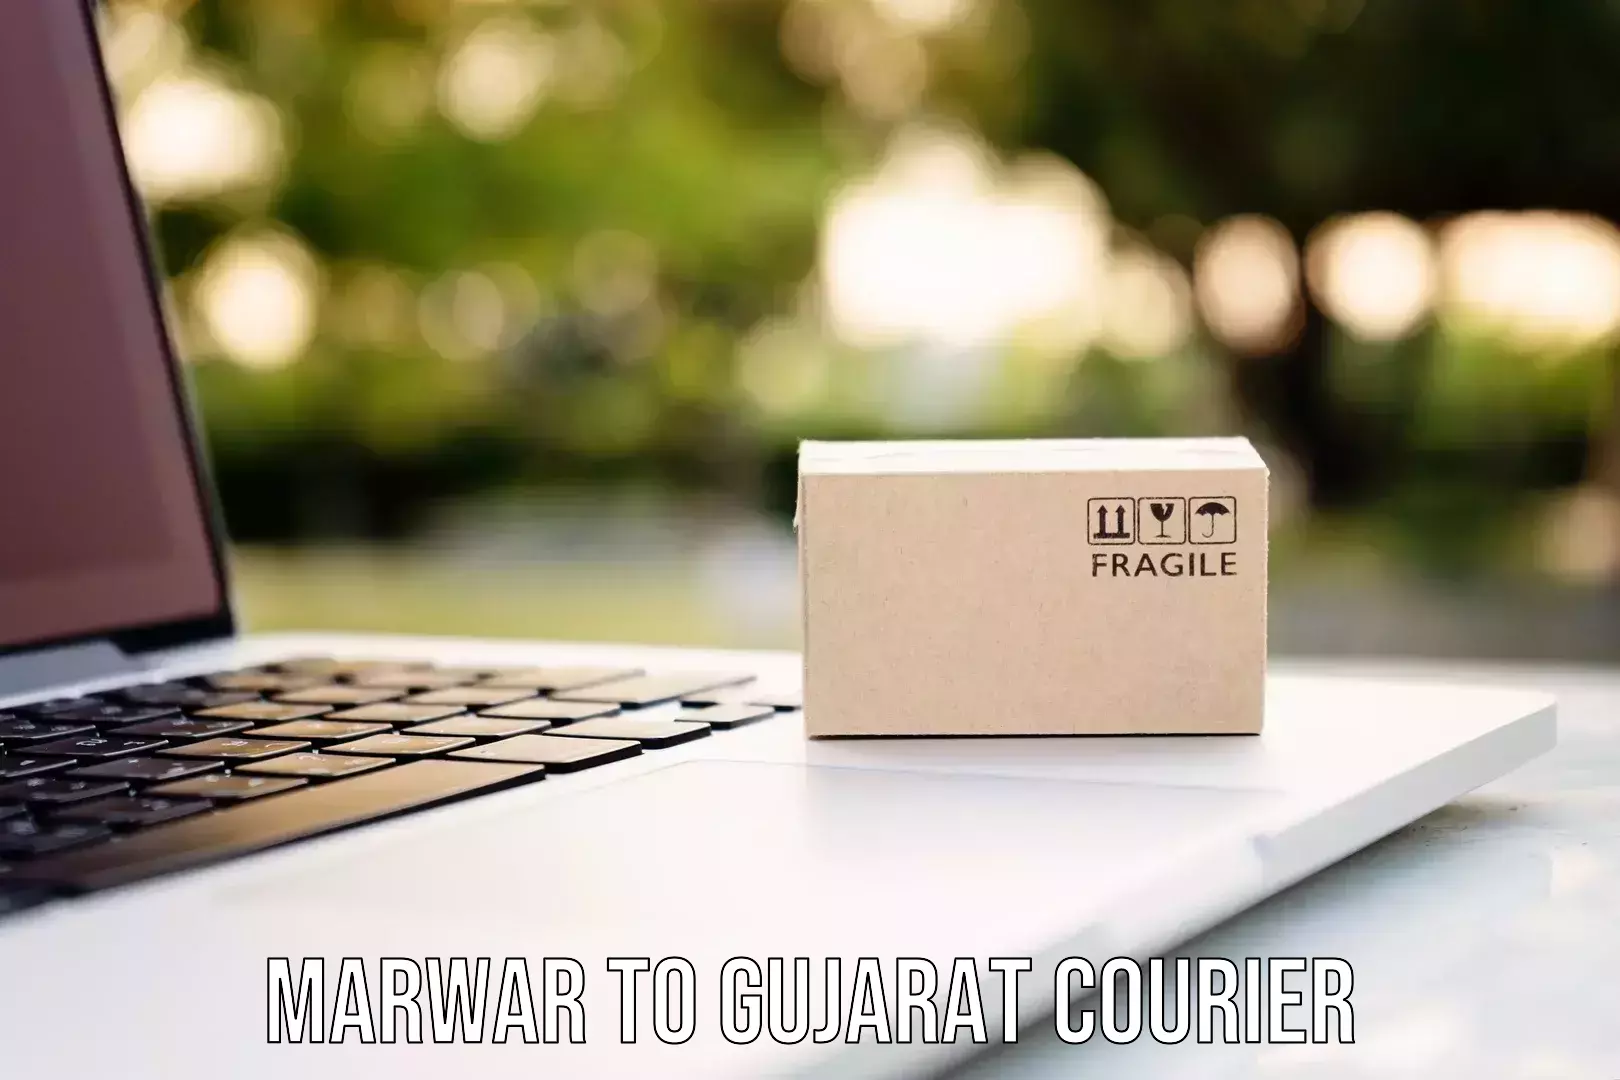 Quality courier partnerships Marwar to Gujarat